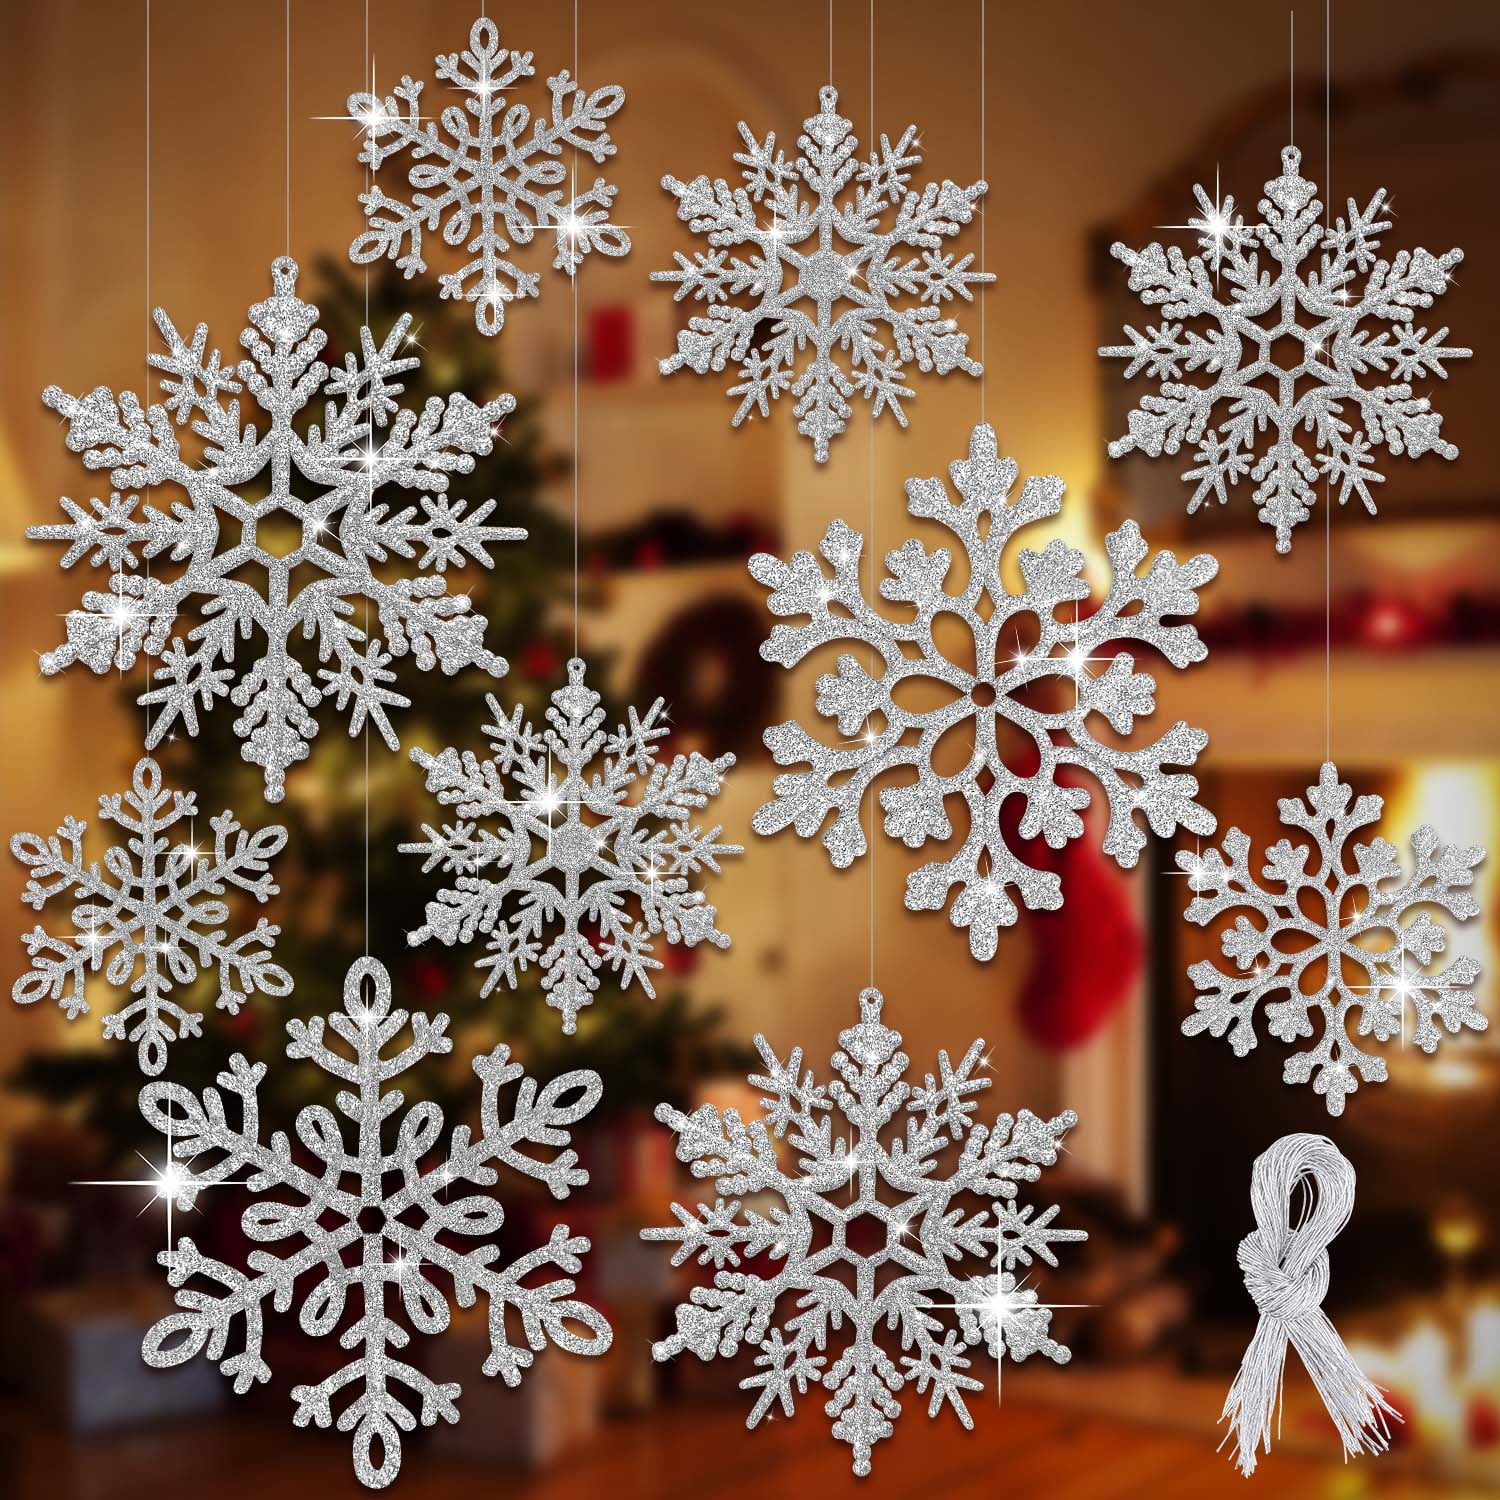  12 Inch Christmas Snowflakes Large Christmas Snowflake Ornaments  Glitter Christmas Hanging Ornaments Big Christmas Snowflake Decorations for  Window Decor Winter Decorations (White,24 Pcs) : Home & Kitchen